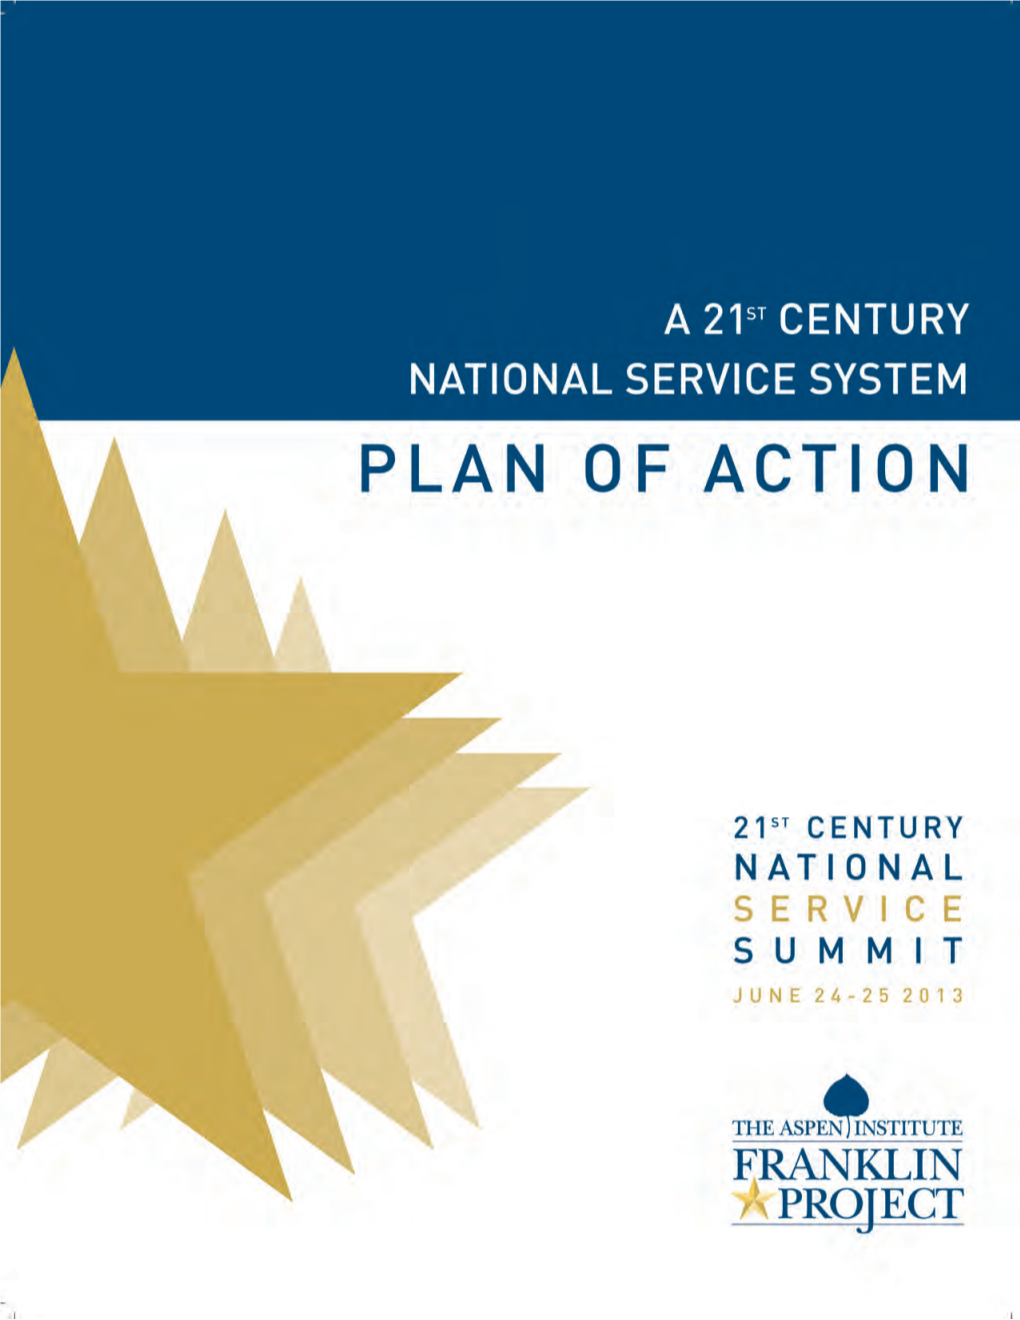 Franklin Project's Plan of Action